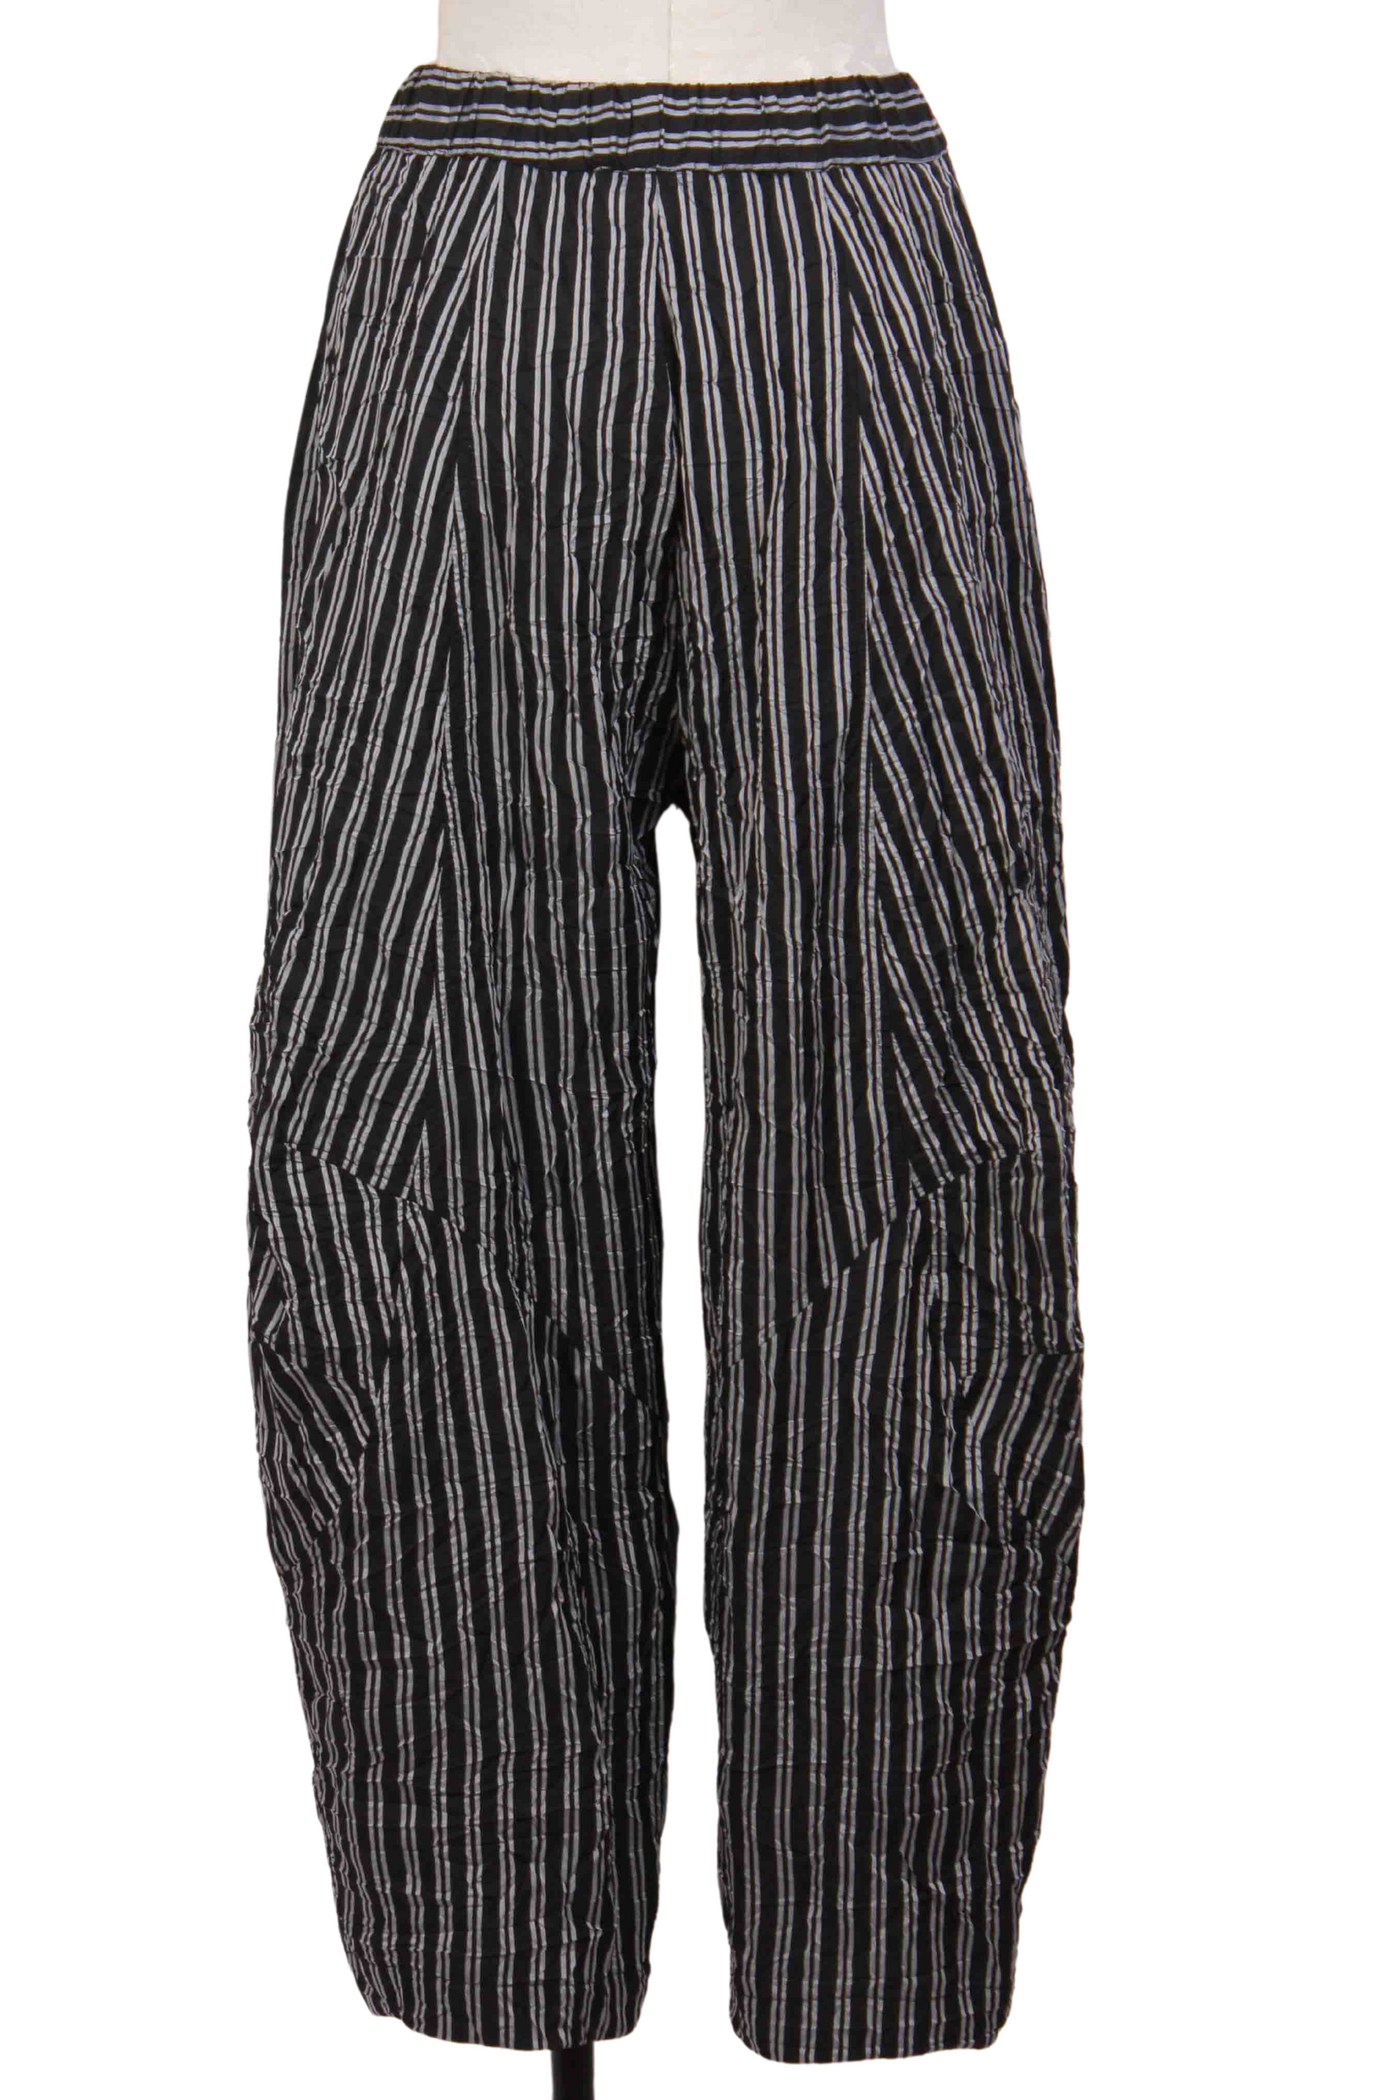 back view of Black and White Pinstriped Parachute Pant by Alembika